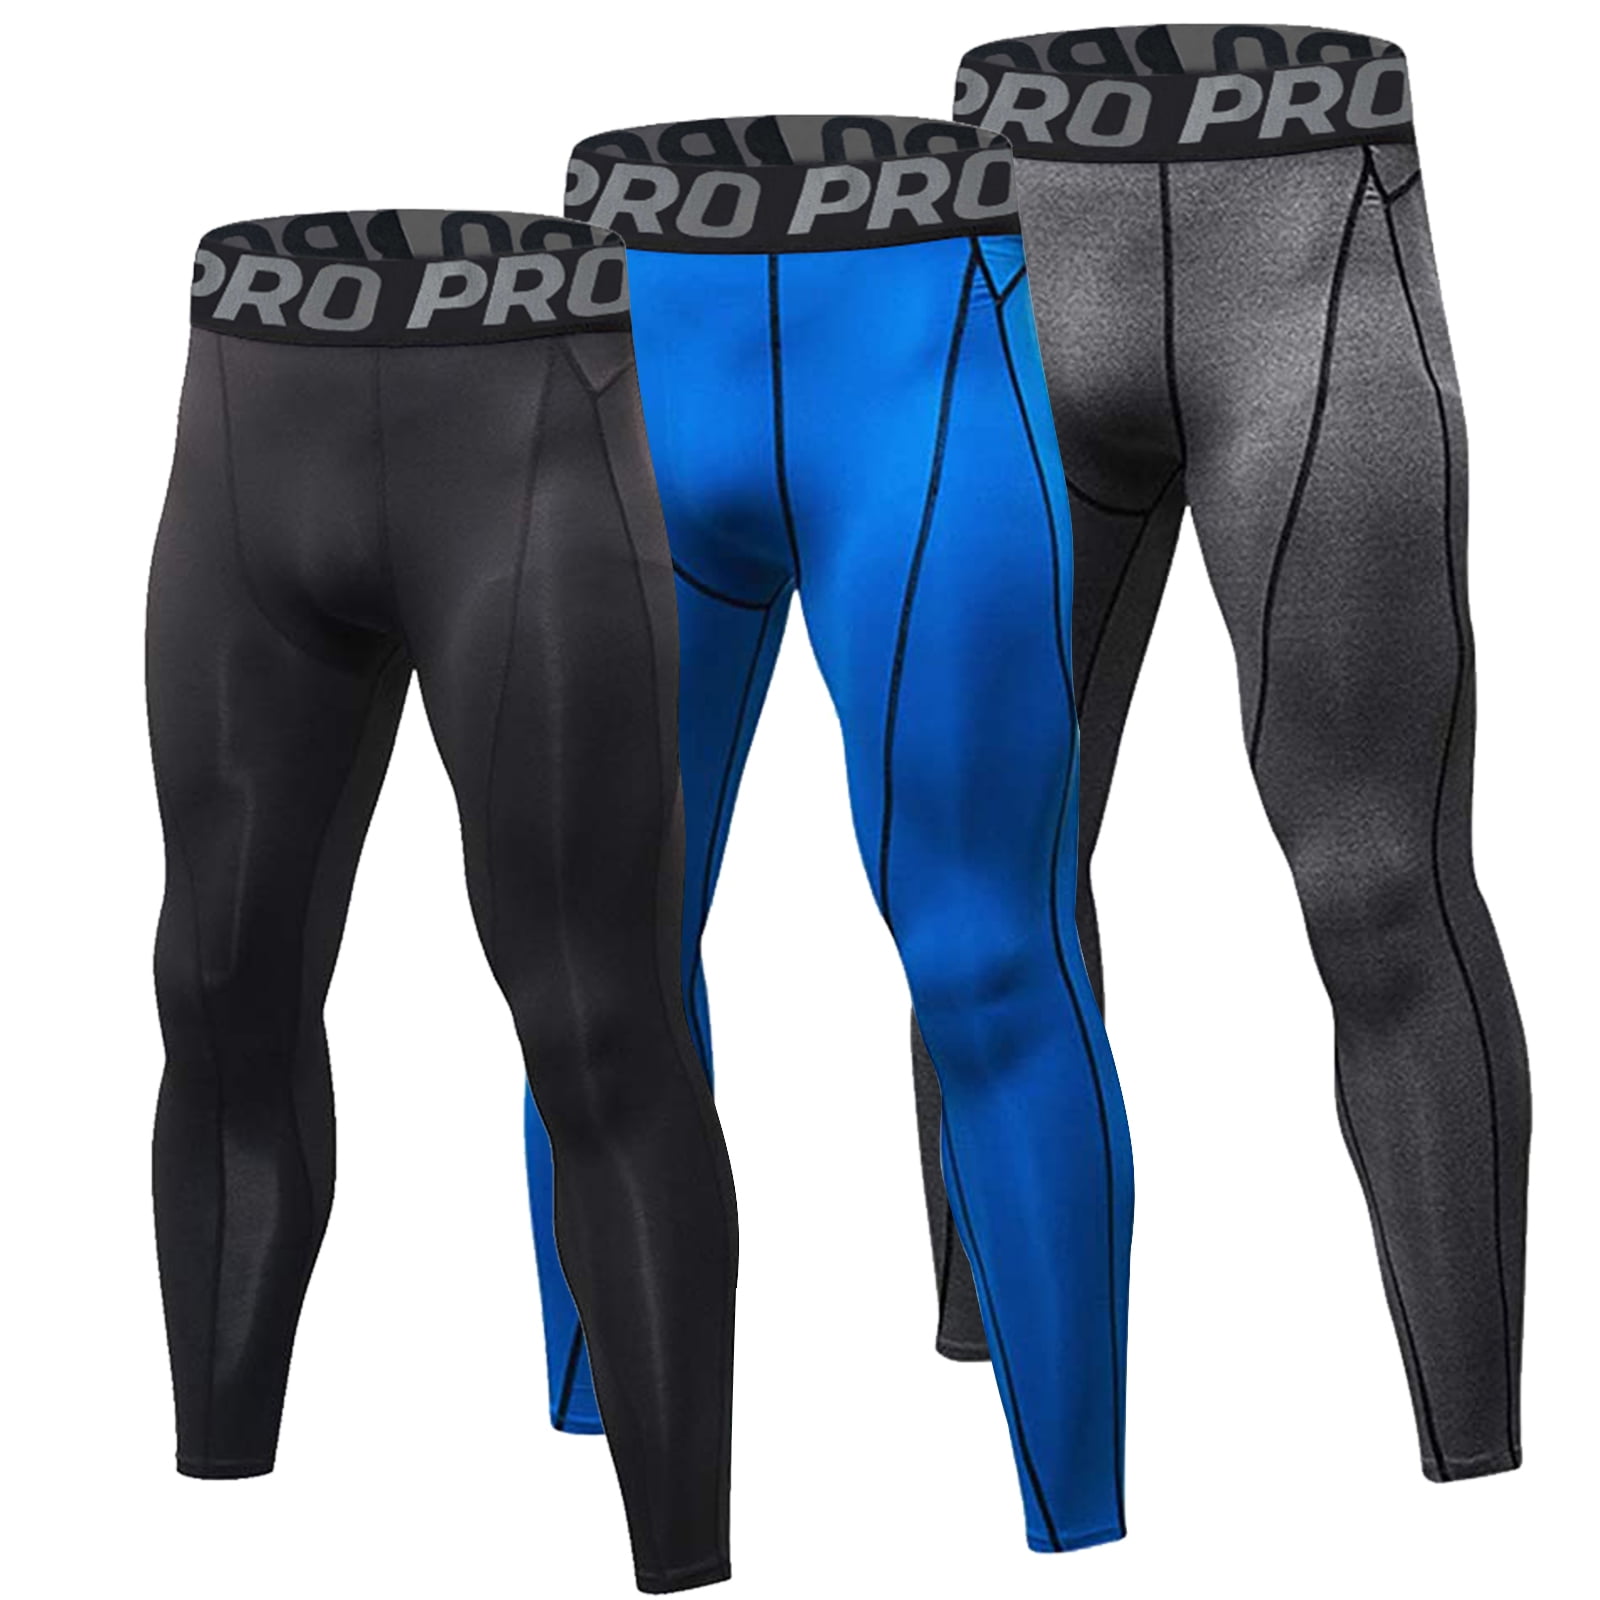 Mens Compression Pants Workout Gym Running Cycling Training Base Layers Tights 